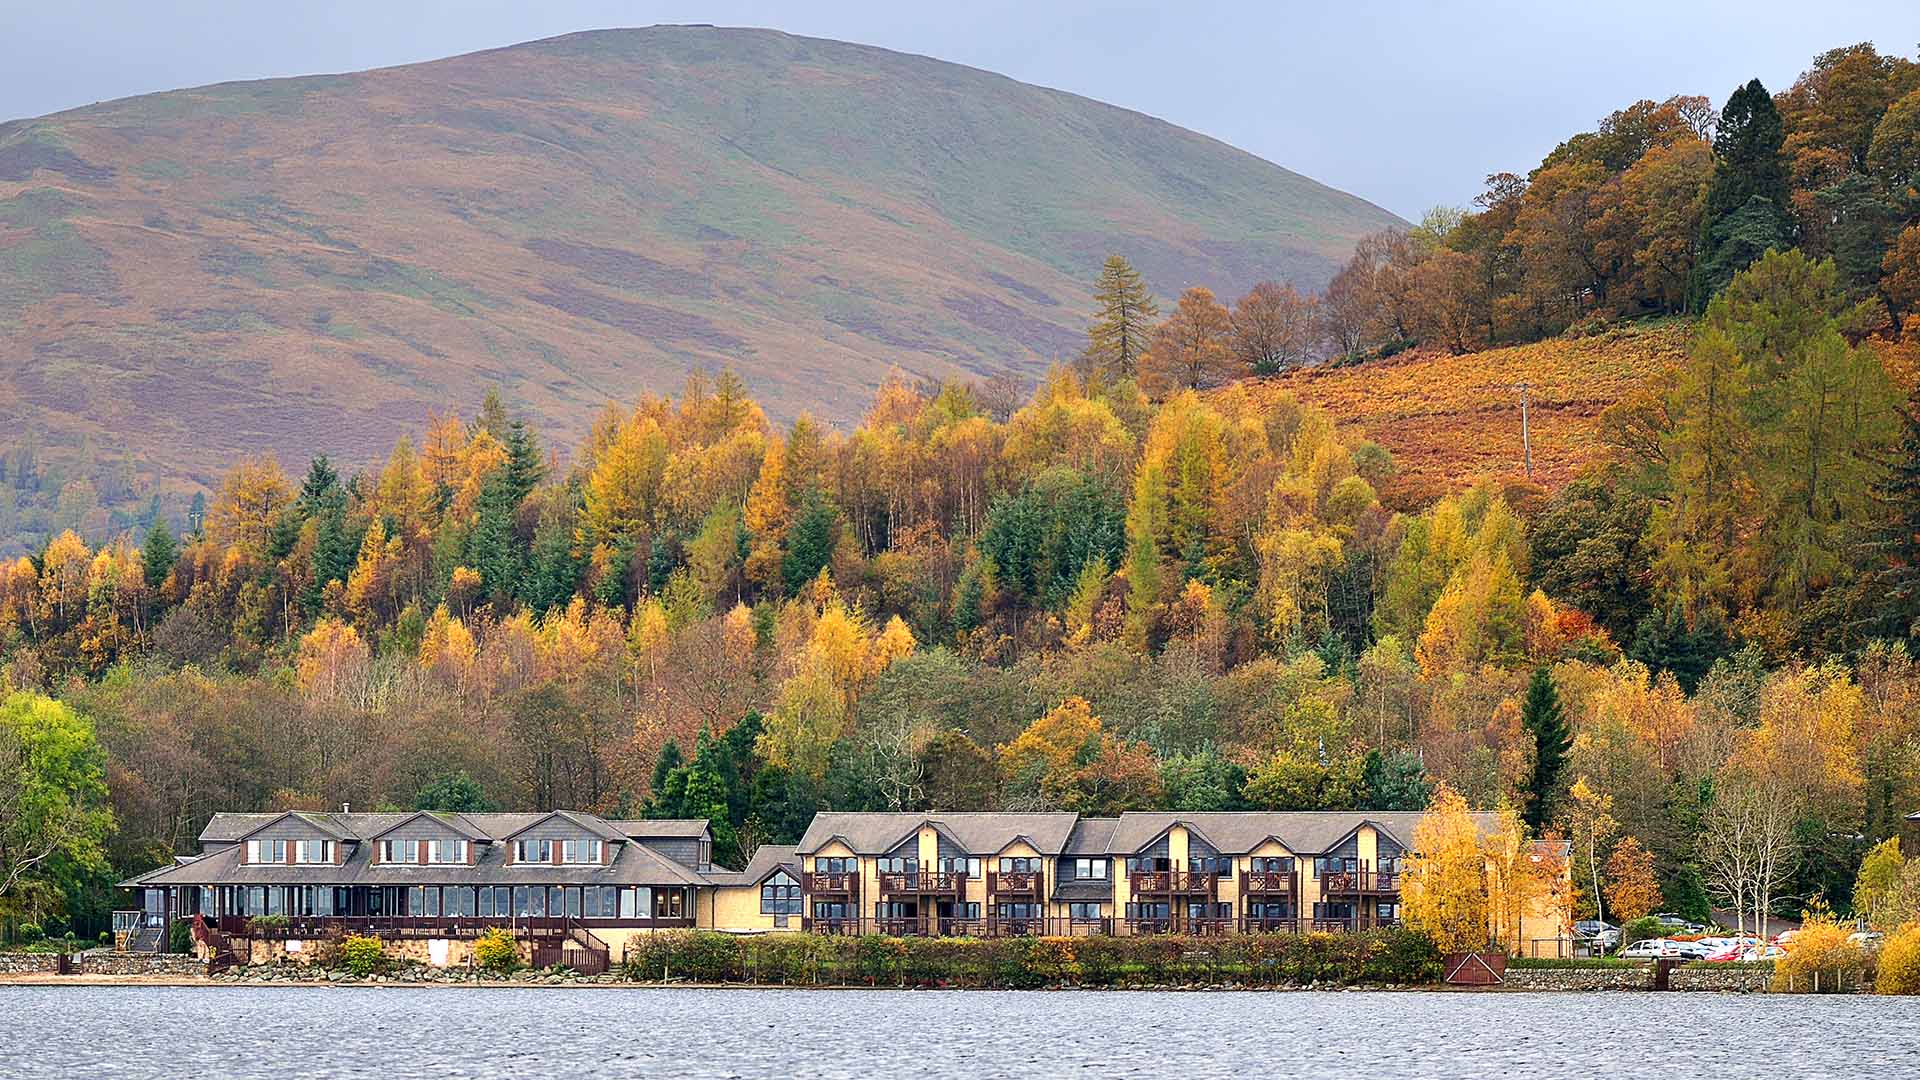 Luss village in Loch Lomond  and the Trossachs National Park